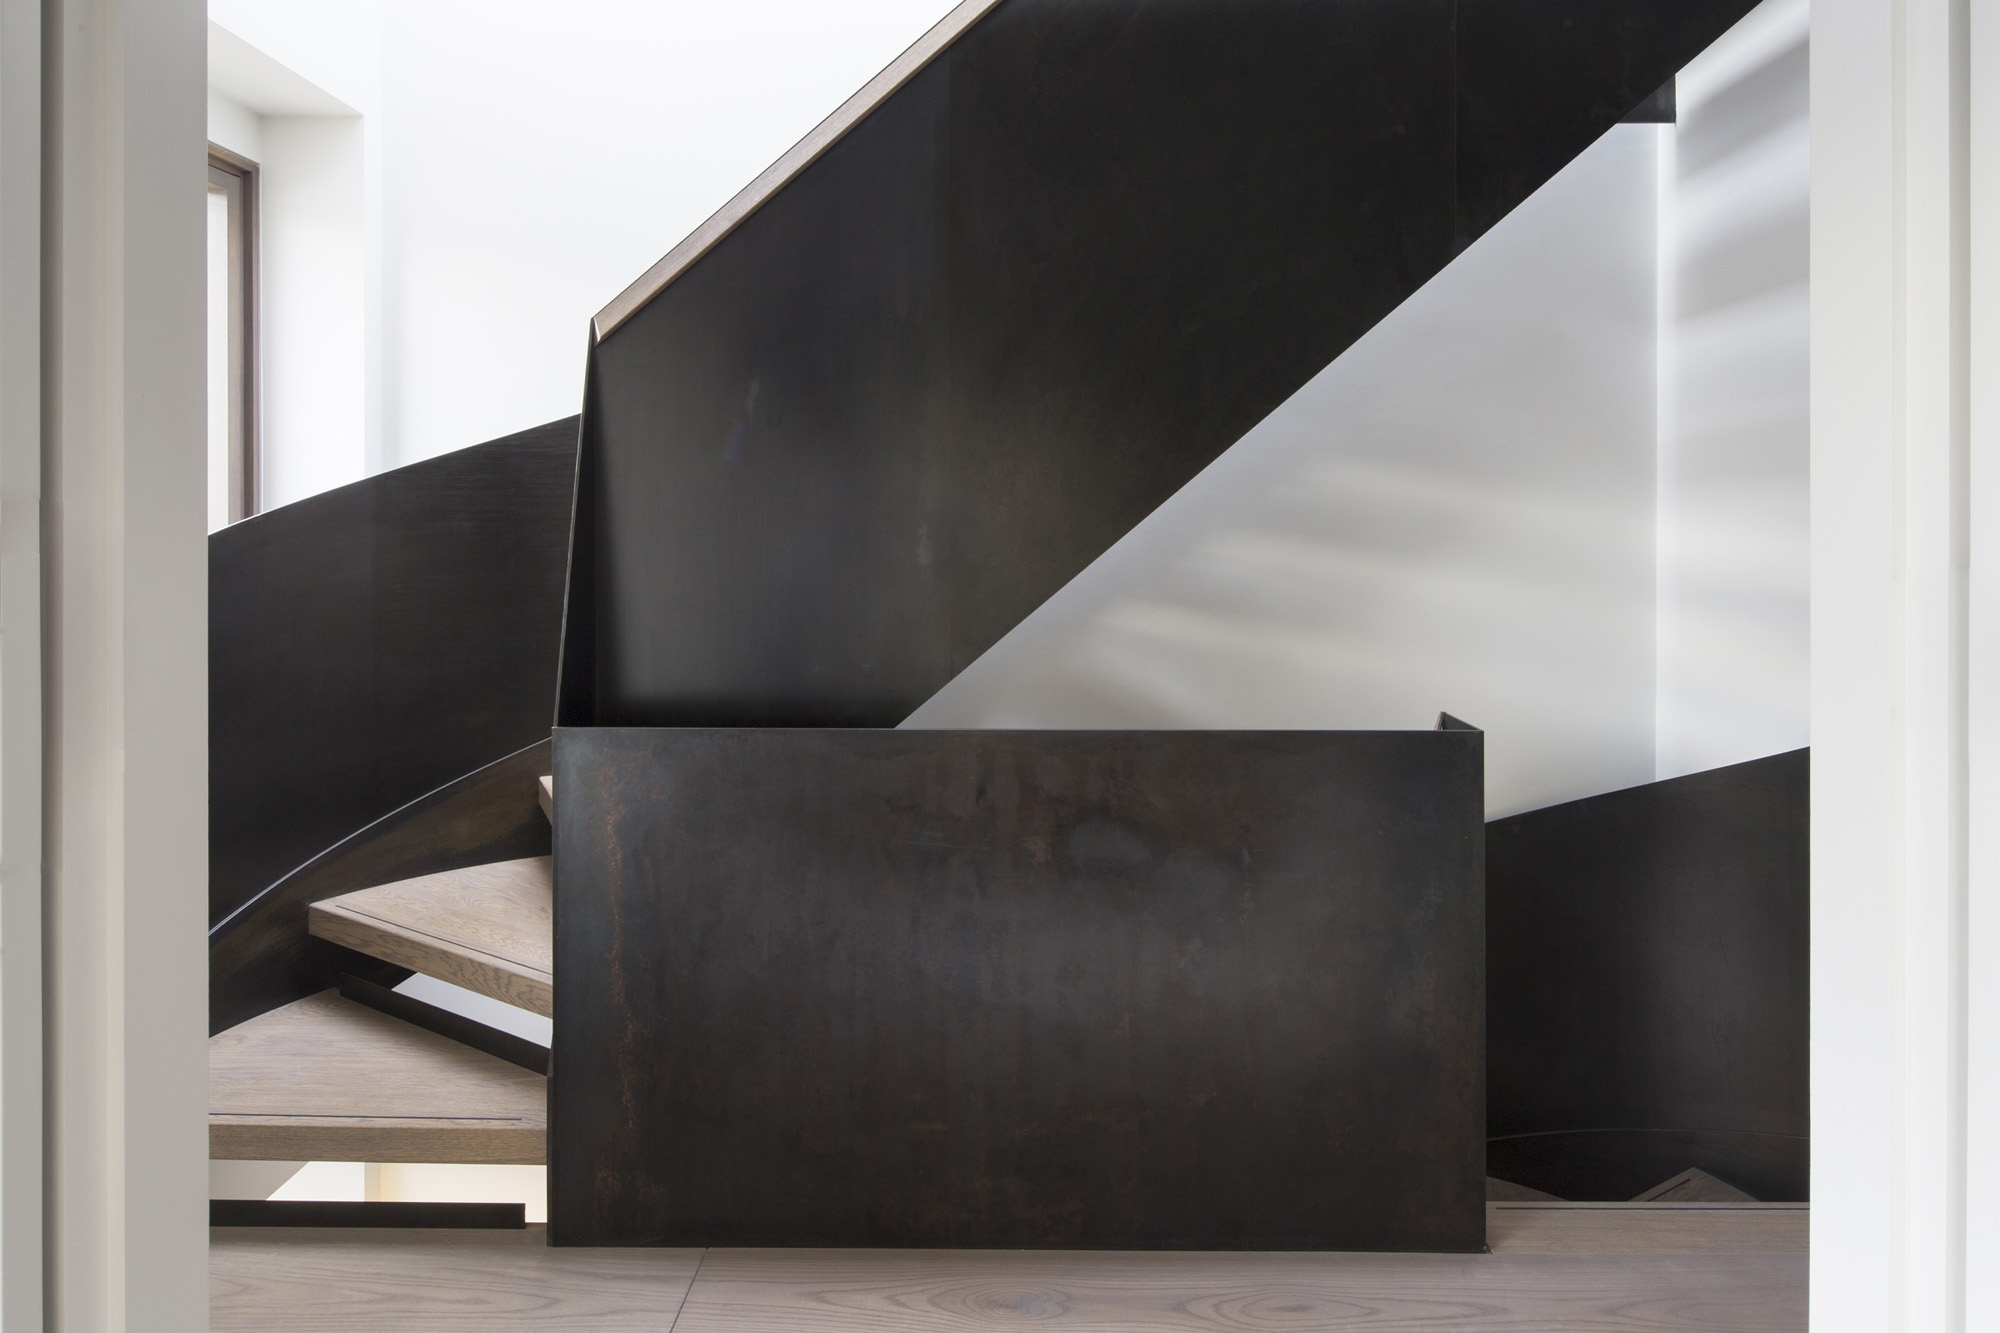 Luxury architecture and interior design in London: Staircase at Old Church Street by Echlin